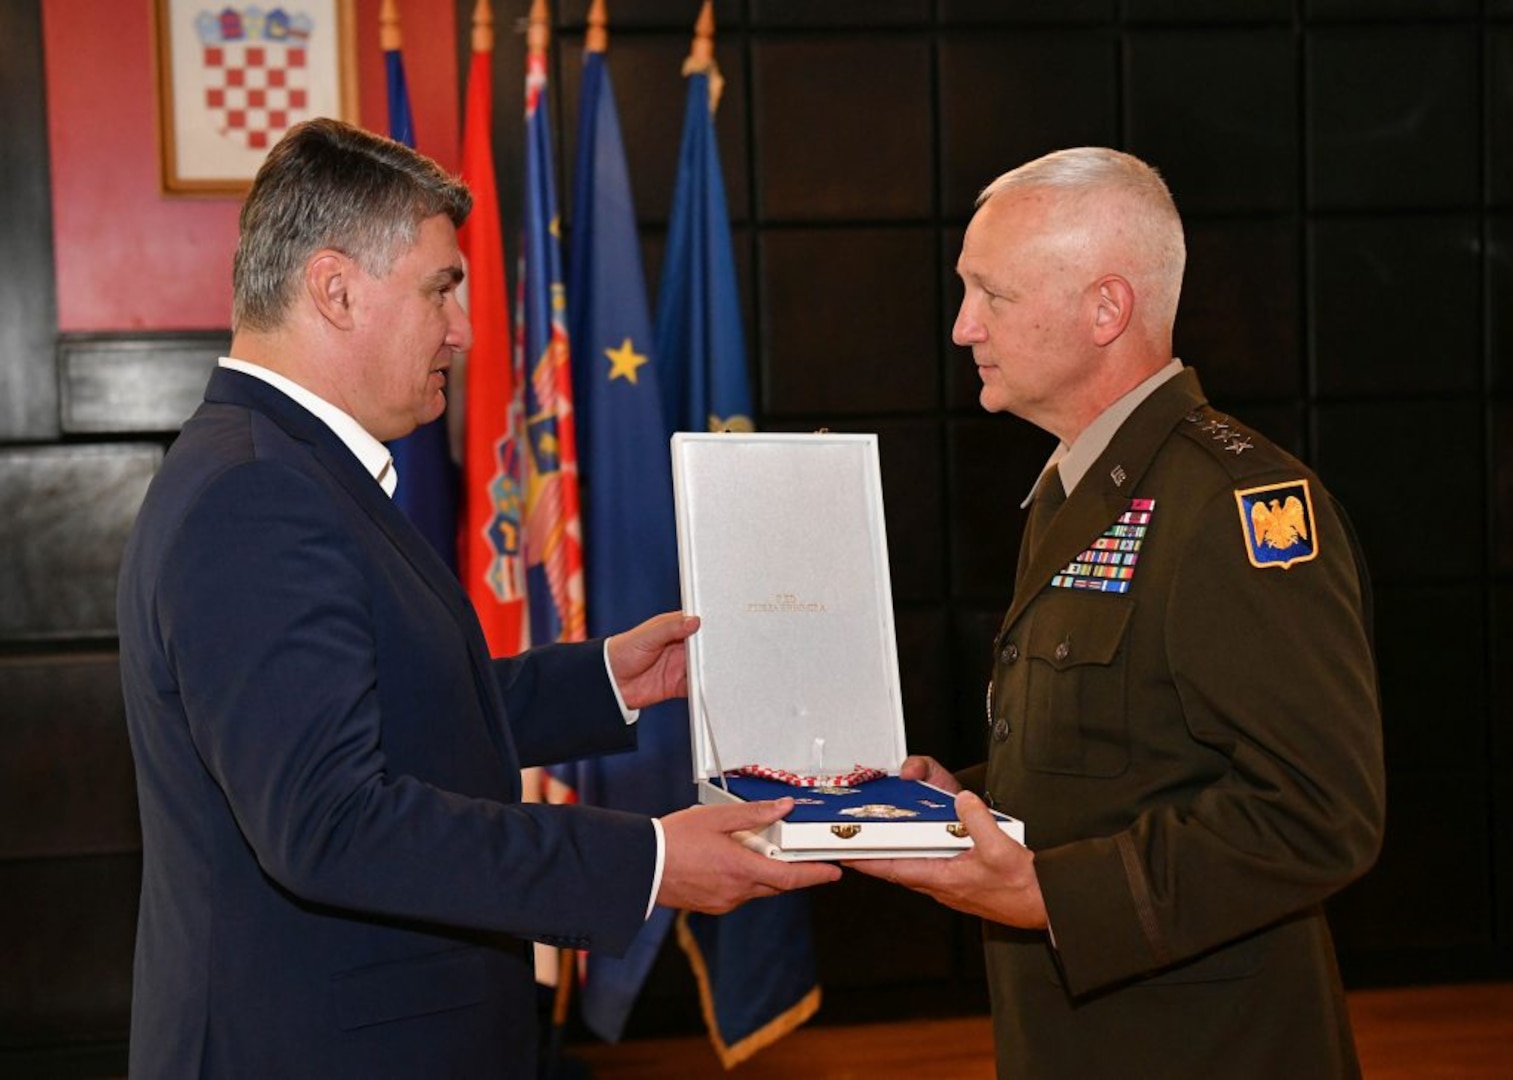 Croatian President Zoran Milanović, left, presents the Duke of Trpimir medal to Army Lt. Gen. Jon Jensen, the director of the Army National Guard, during a ceremony in Split, Croatia, Sept. 27, 2021, in honor of the 25-year partnership between the Minnesota National Guard and Croatia as part of the State Partnership Program. The Department of Defense's State Partnership Program pairs National Guard elements with partner nations worldwide and currently consists of 85 partnerships with 92 nations.